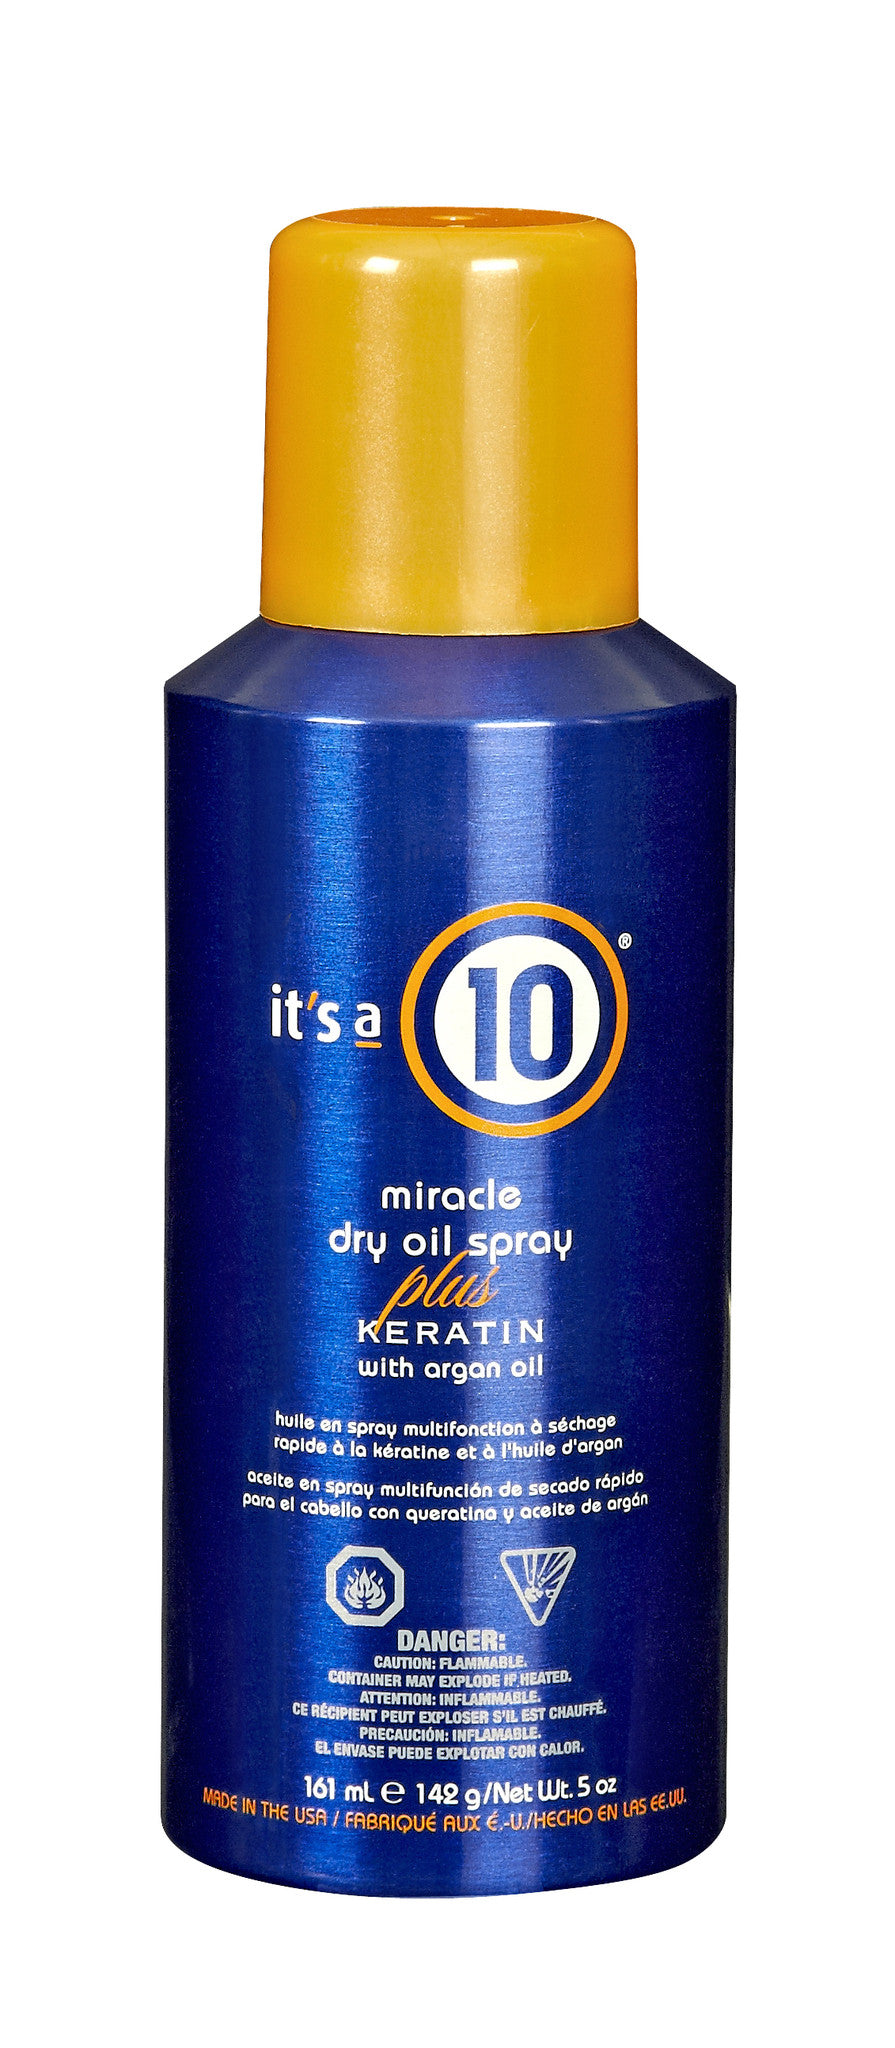 Its a 10 Miracle Dry Oil Spray